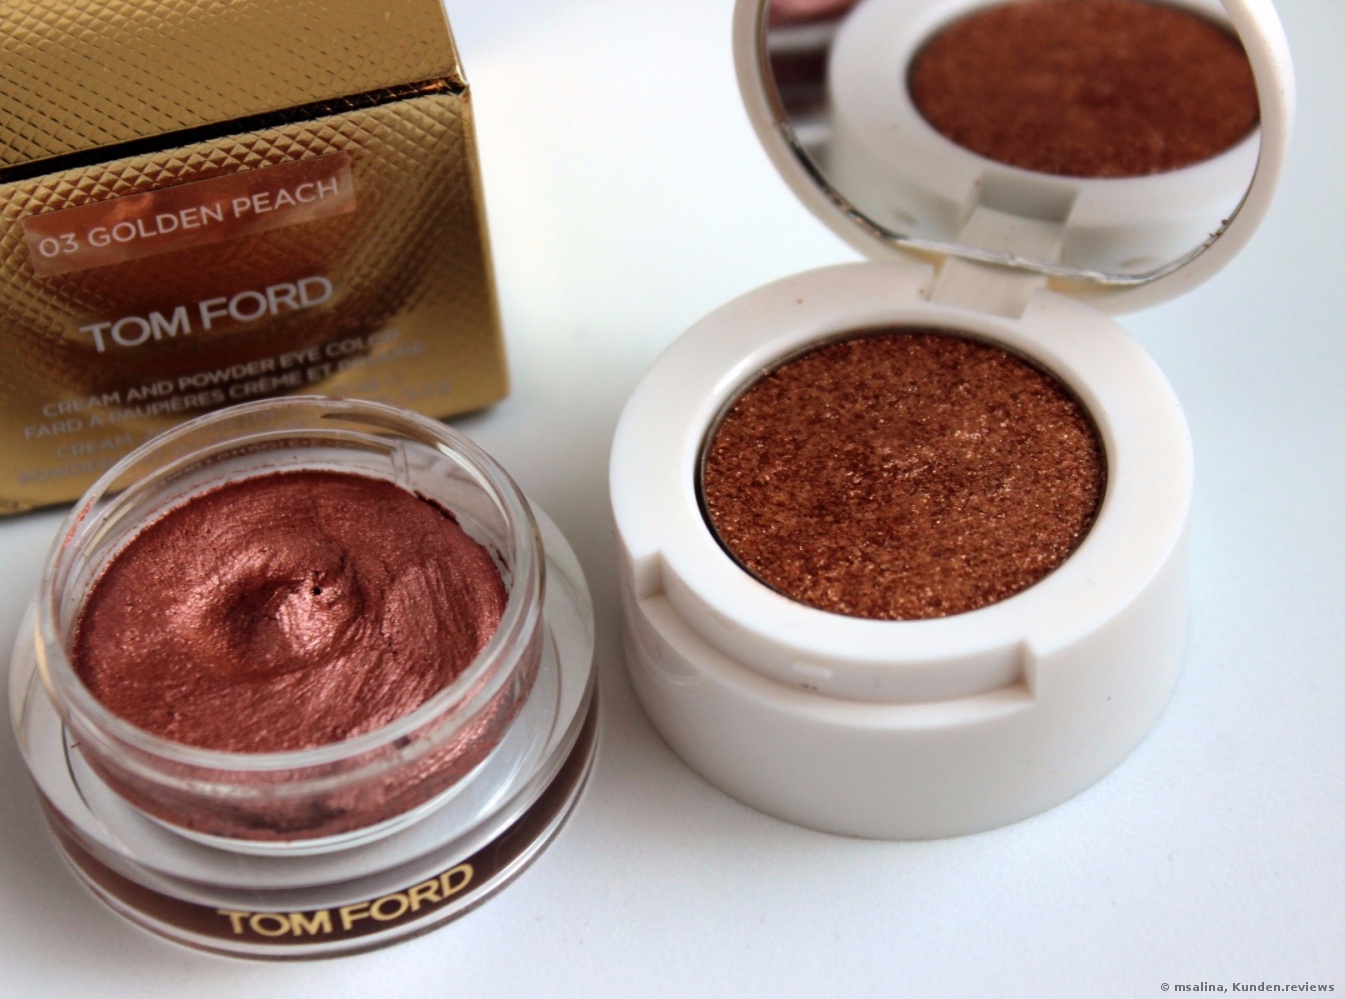 Tom Ford Cream and Powder Eye Color Lidschatten Foto